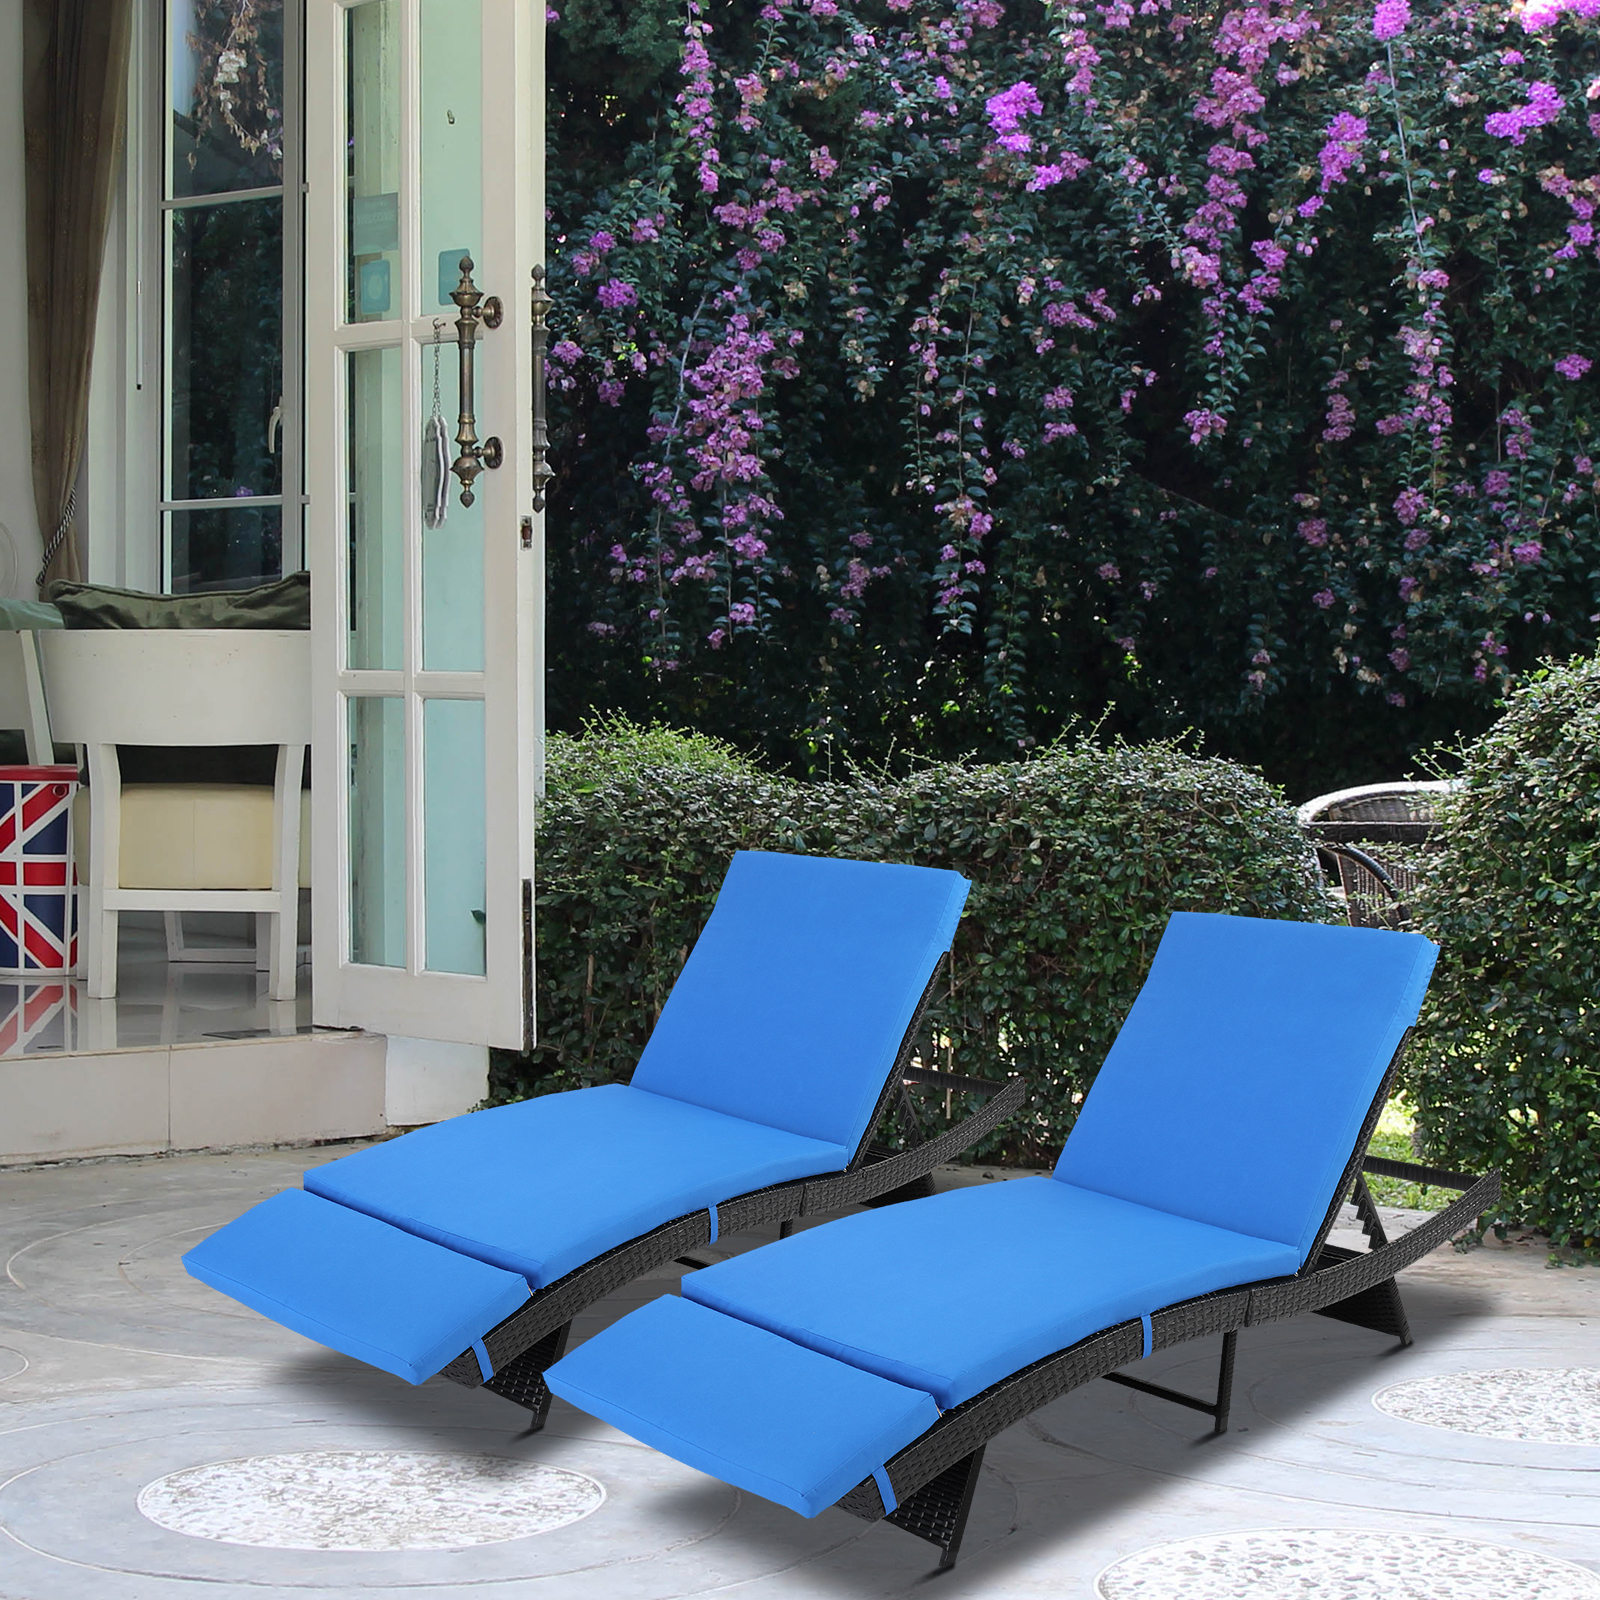 Patio Chaise Lounge Furniture, 5-Position Adjustable Cushioned Rattan Chaise, PE Wicker Backrest Lounger Chair, Suitable for Pool Balcony Deck Yard Garden, B33 - image 3 of 9